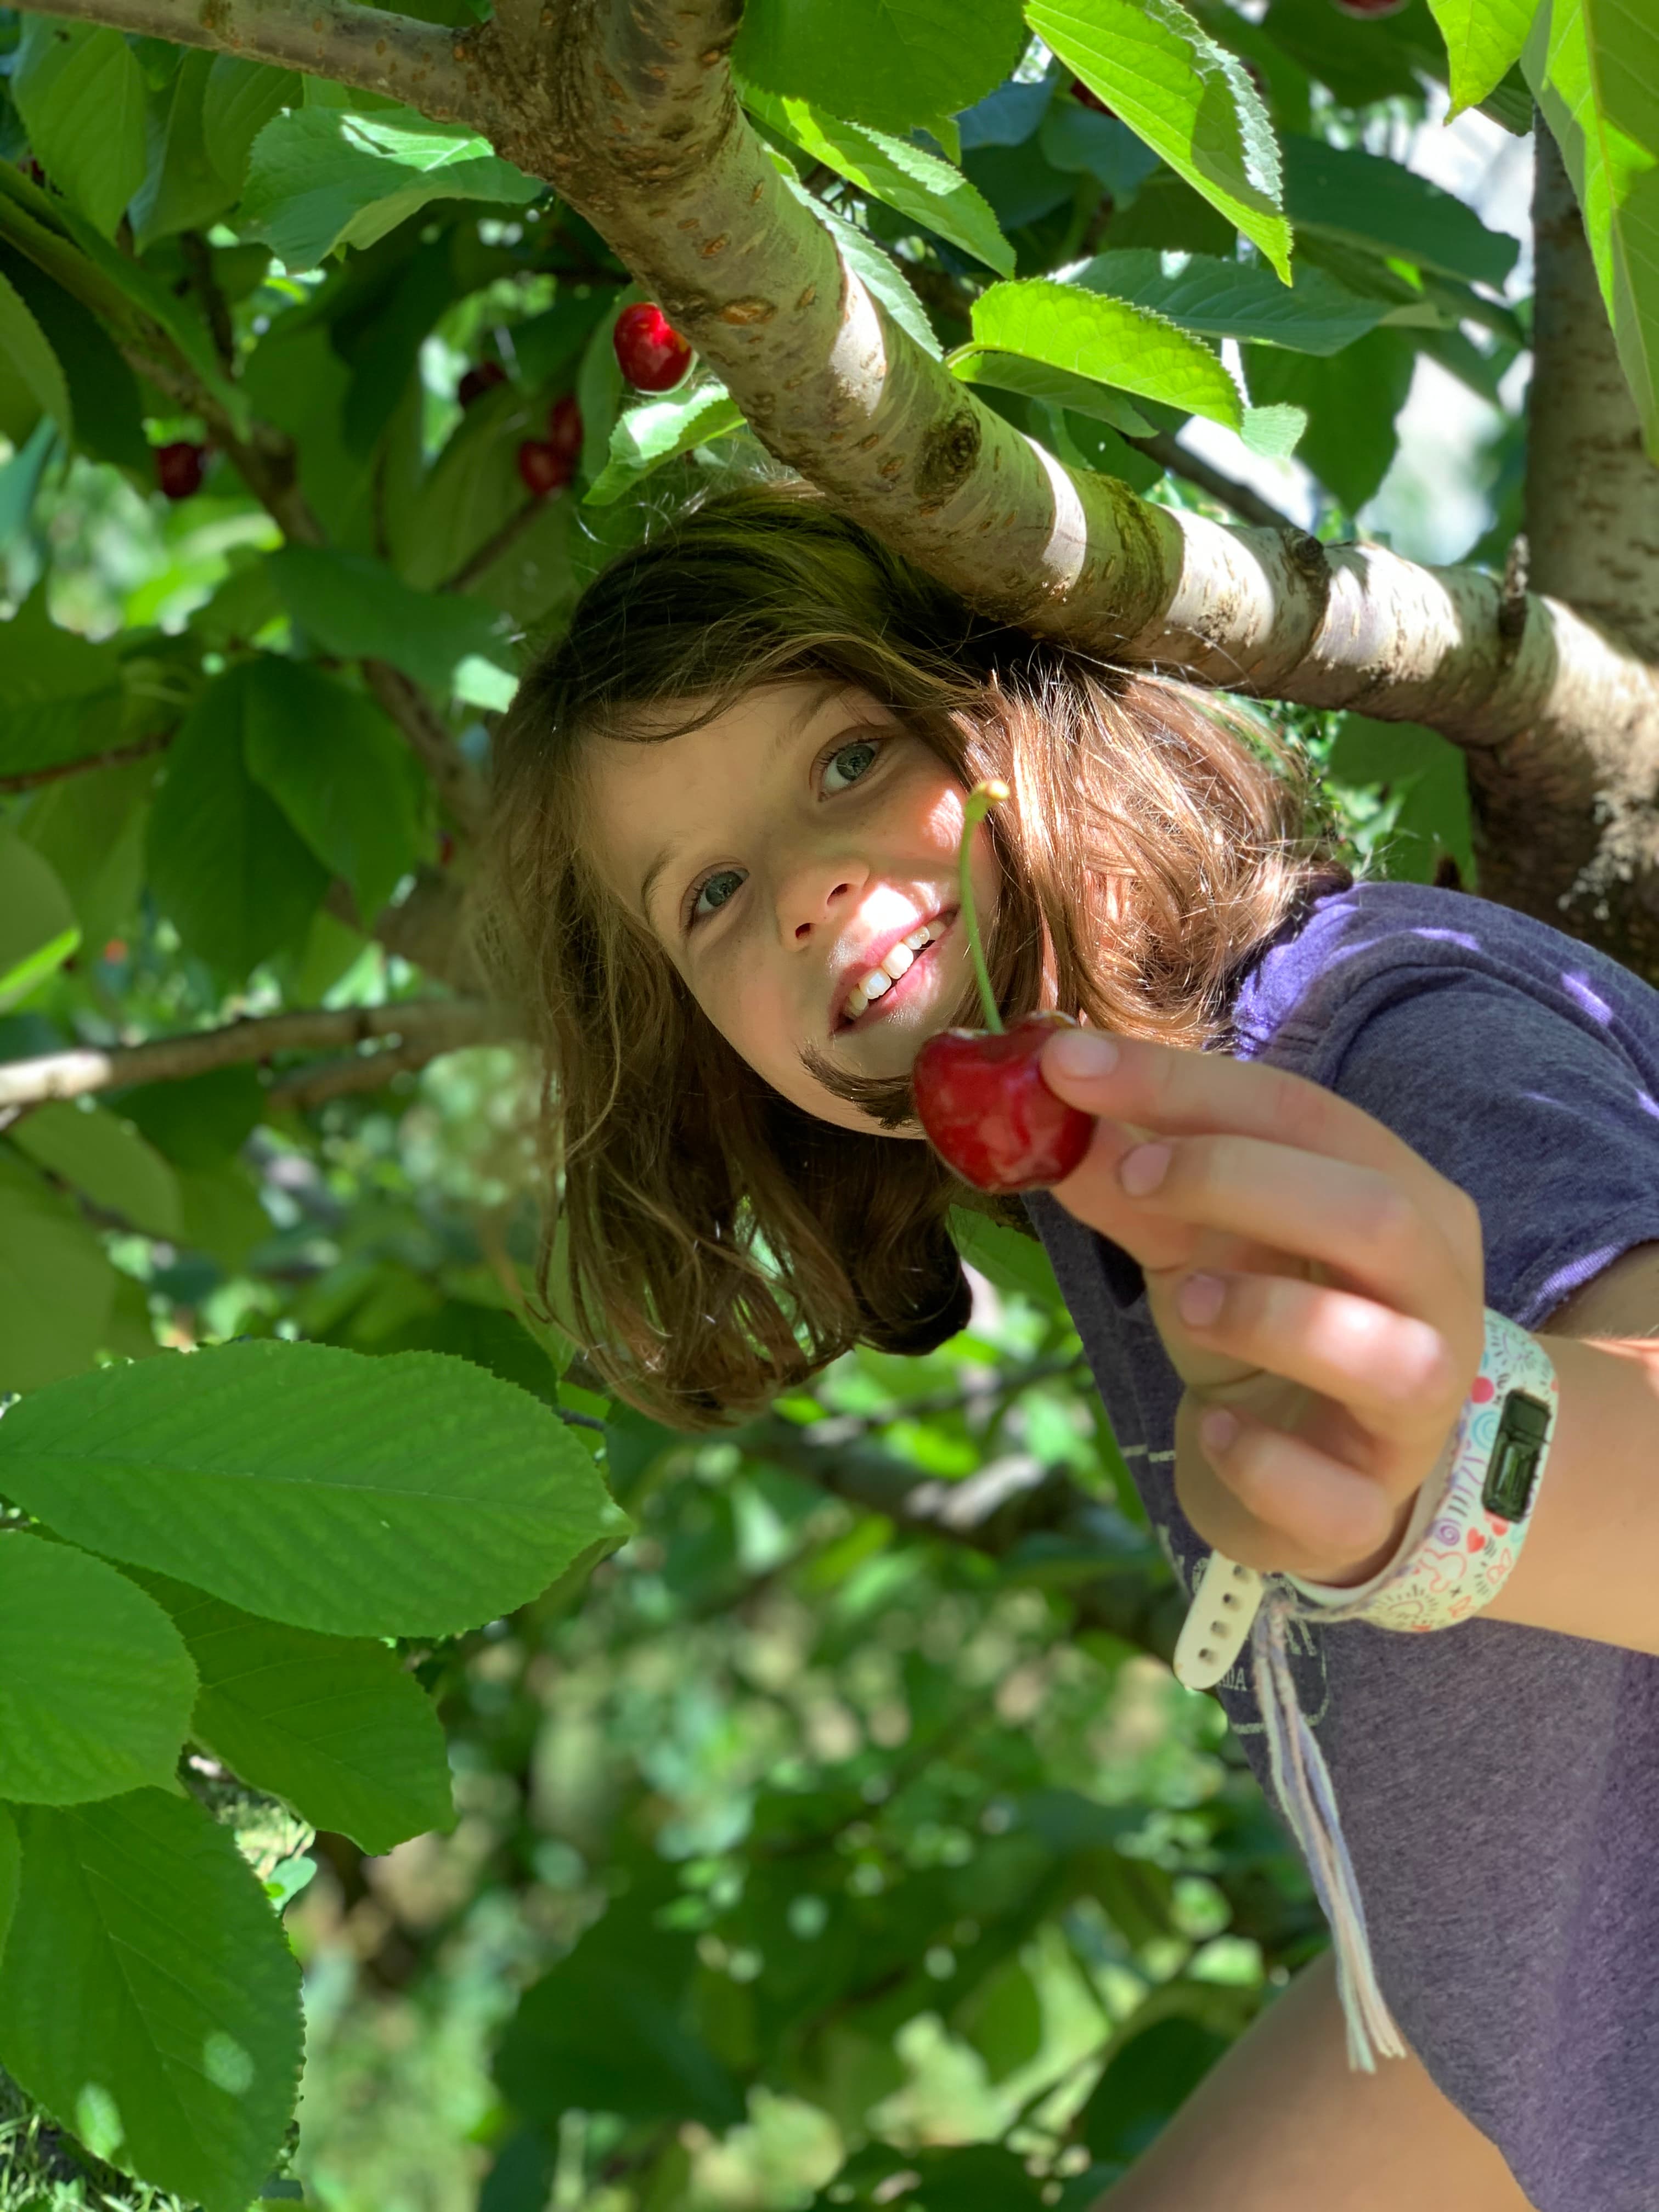 young girl in tree dolding cherry